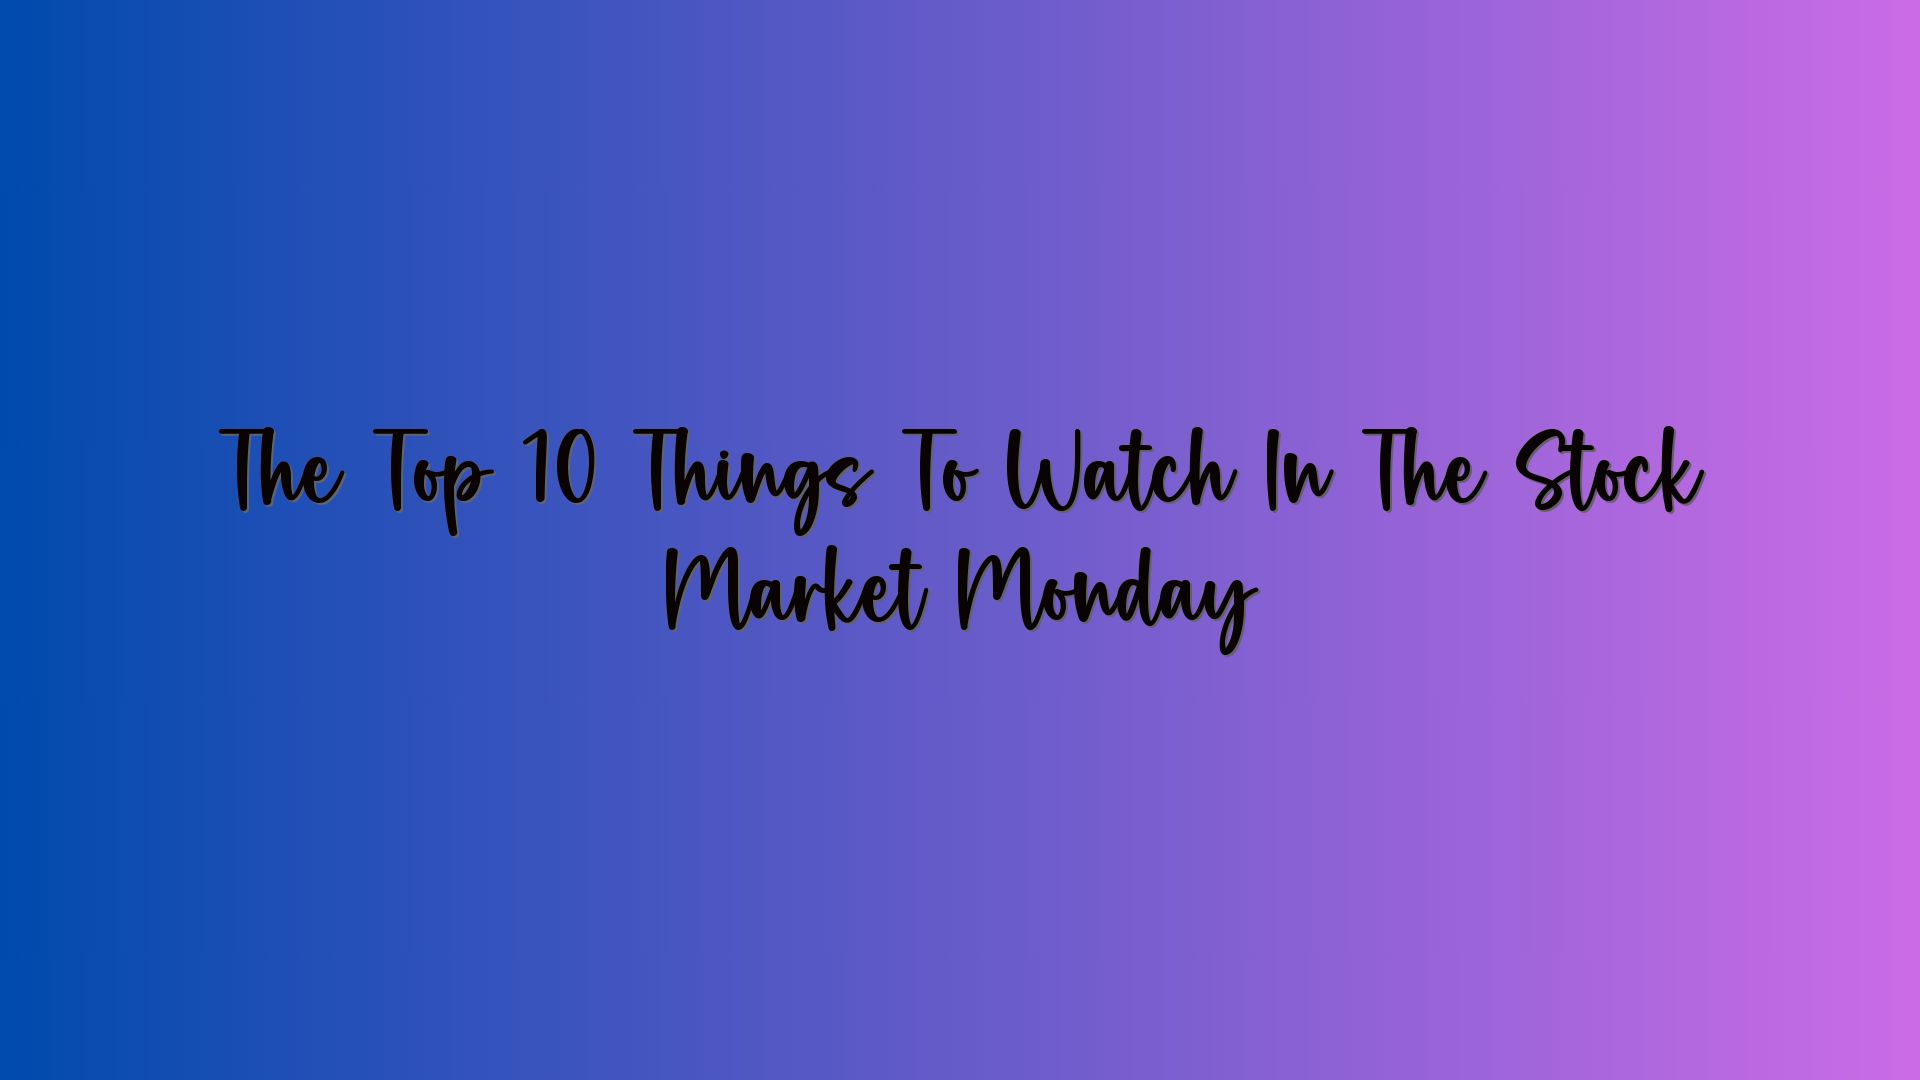 The Top 10 Things To Watch In The Stock Market Monday